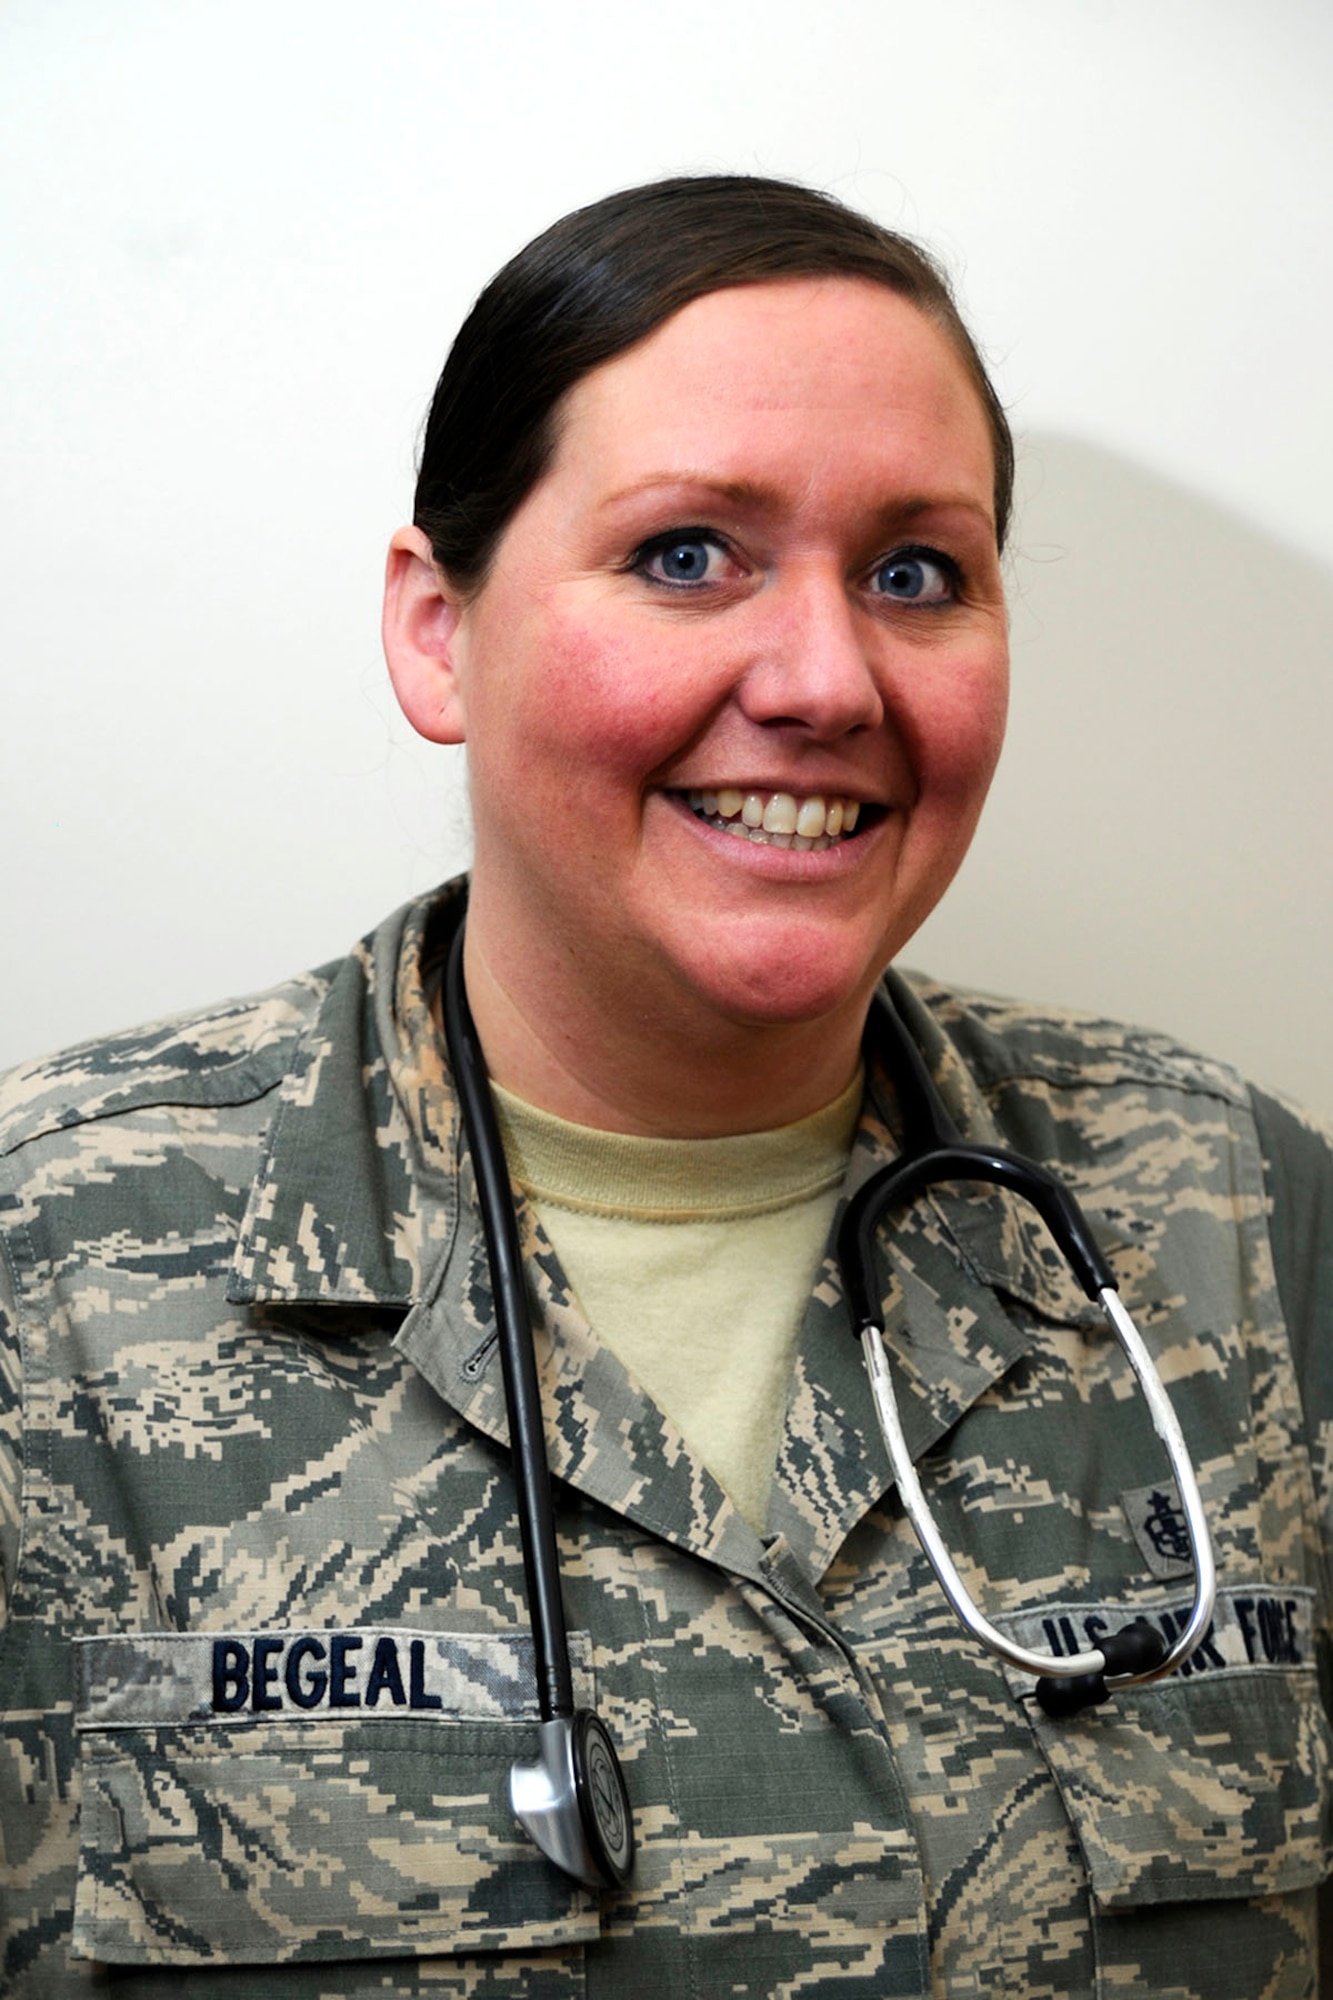 Staff Sgt. Christina Begeal, 22nd Medical Group aerospace medical technician, poses for a photo, Jan. 13, 2016, at McConnell Air Force Base, Kan. Begeal saved the life of an individual at a local restaurant who suffered a seizure during his work shift. 
